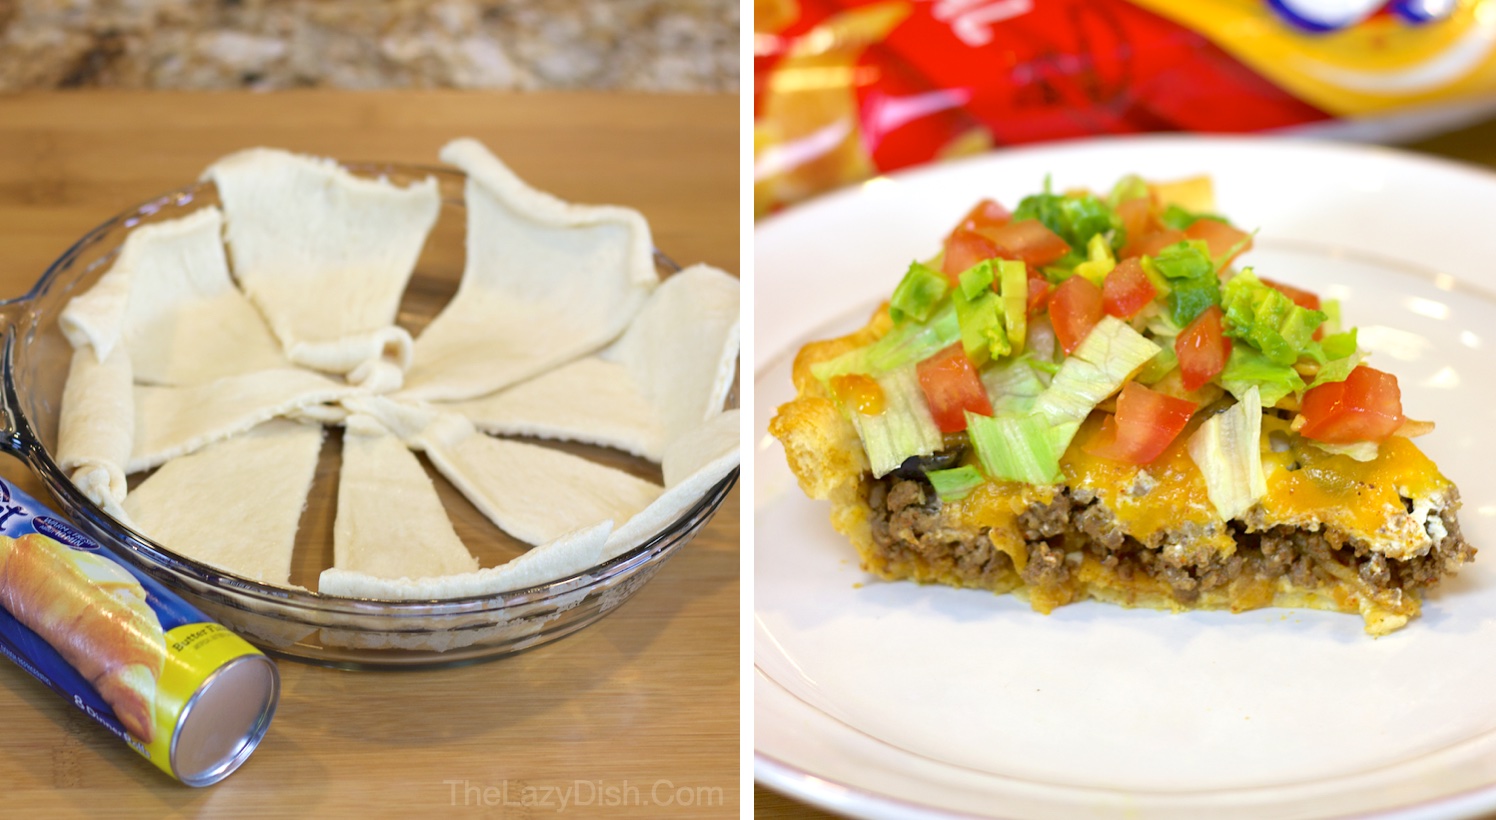 This Frito Taco Pie is a fun and yummy dinner idea for a family with kids. Tacos in the shape of a pie! The tortillas are replaced with Pillsbury crescent dough, giving this easy dinner recipe a unique flavor.